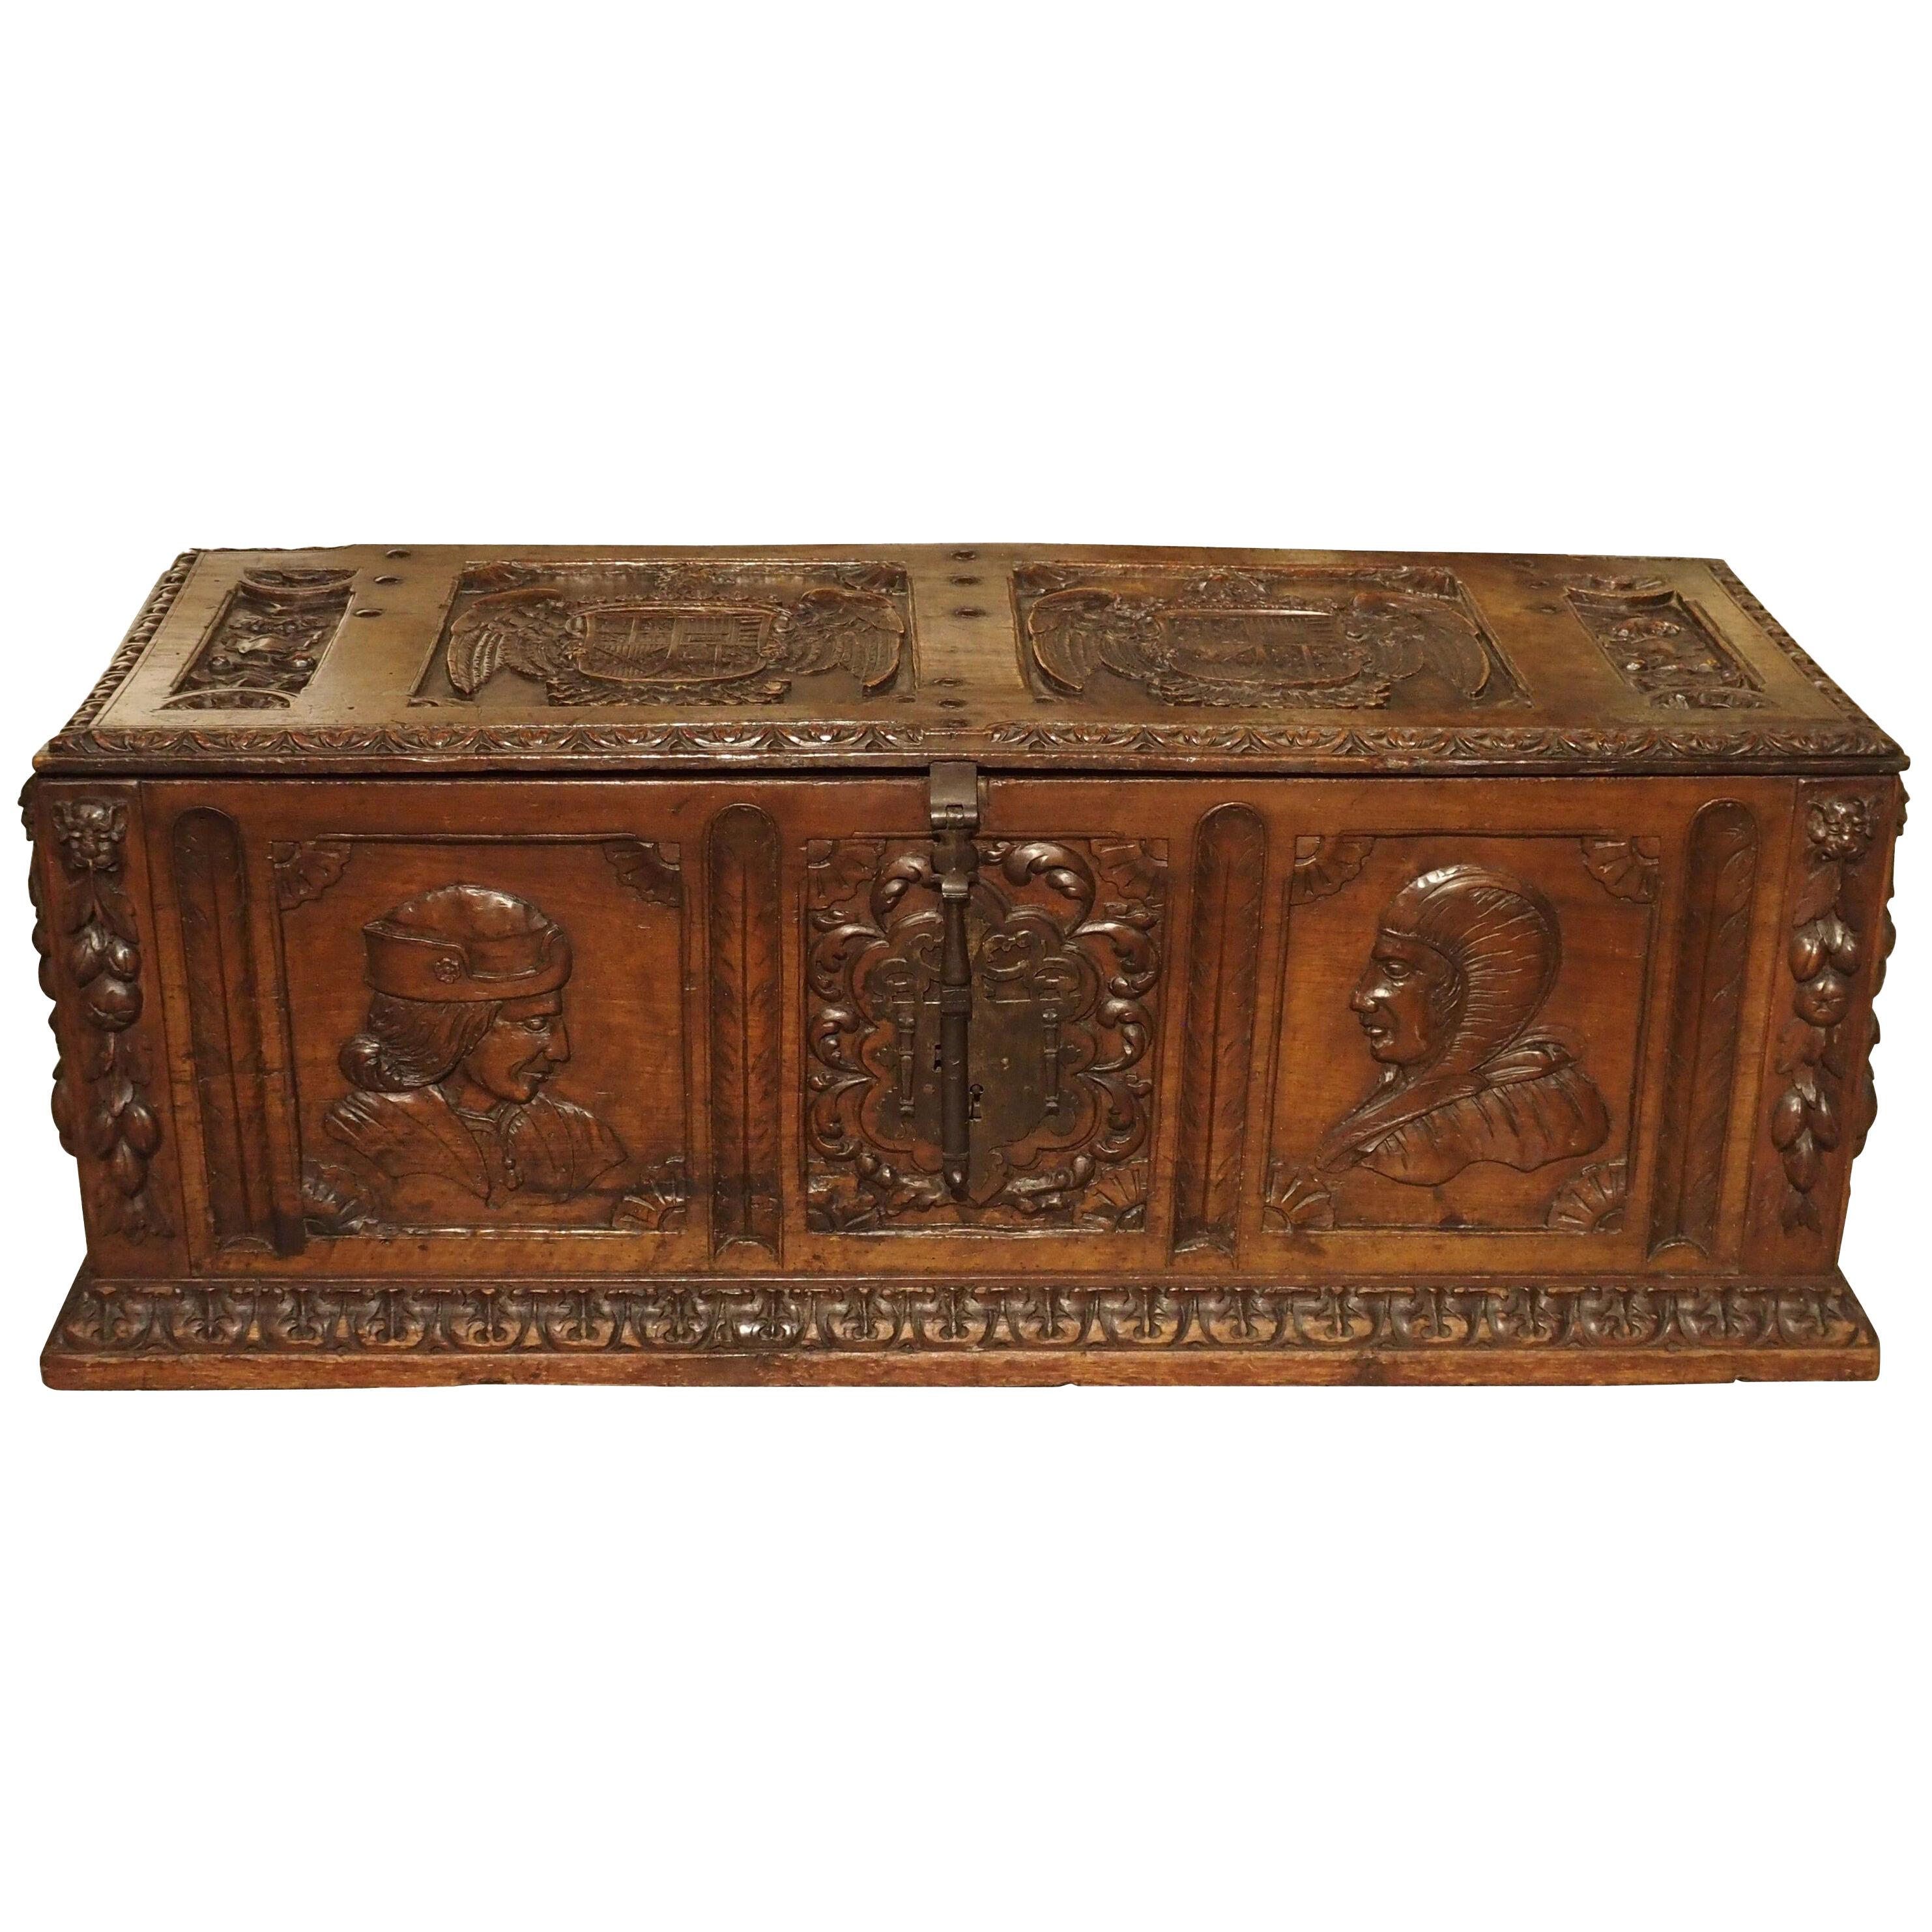 Antique Walnut Wood Renaissance Style Armorial Trunk from Spain